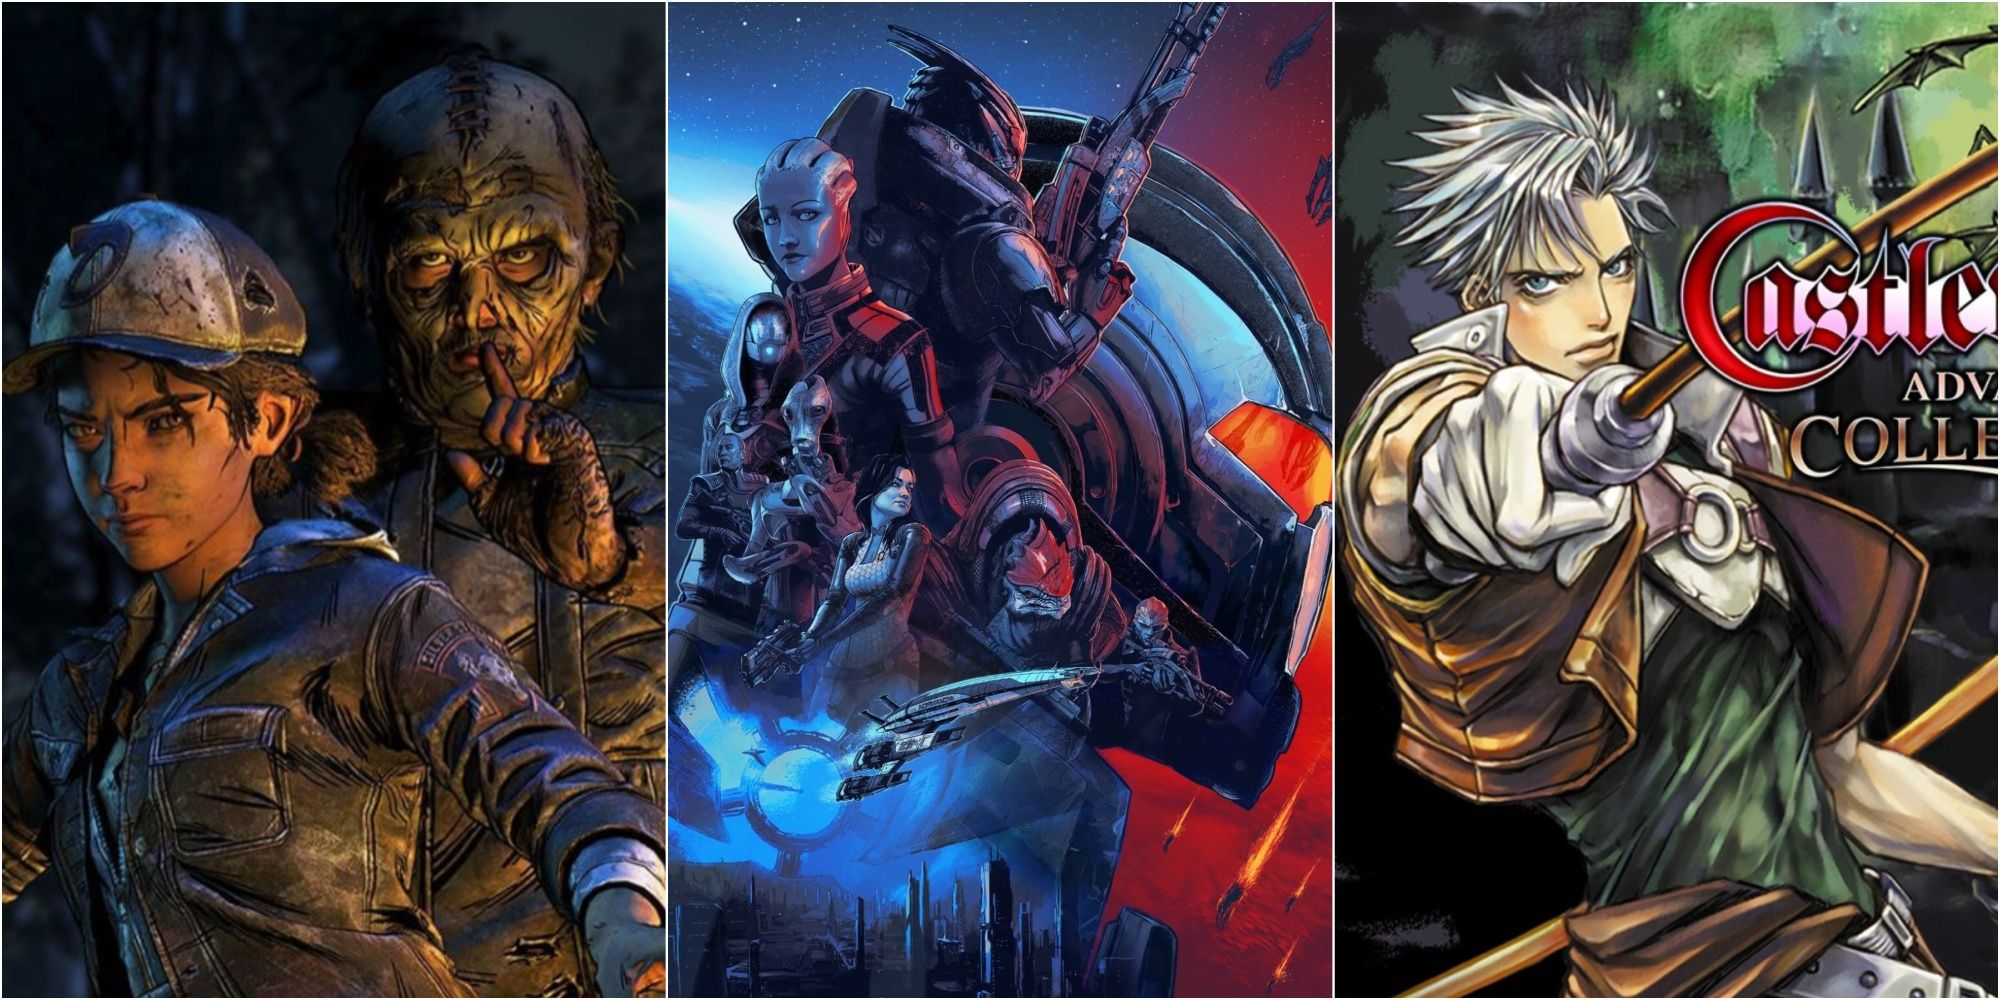 a collage image featuring the walking dead, mass effect and castlevania